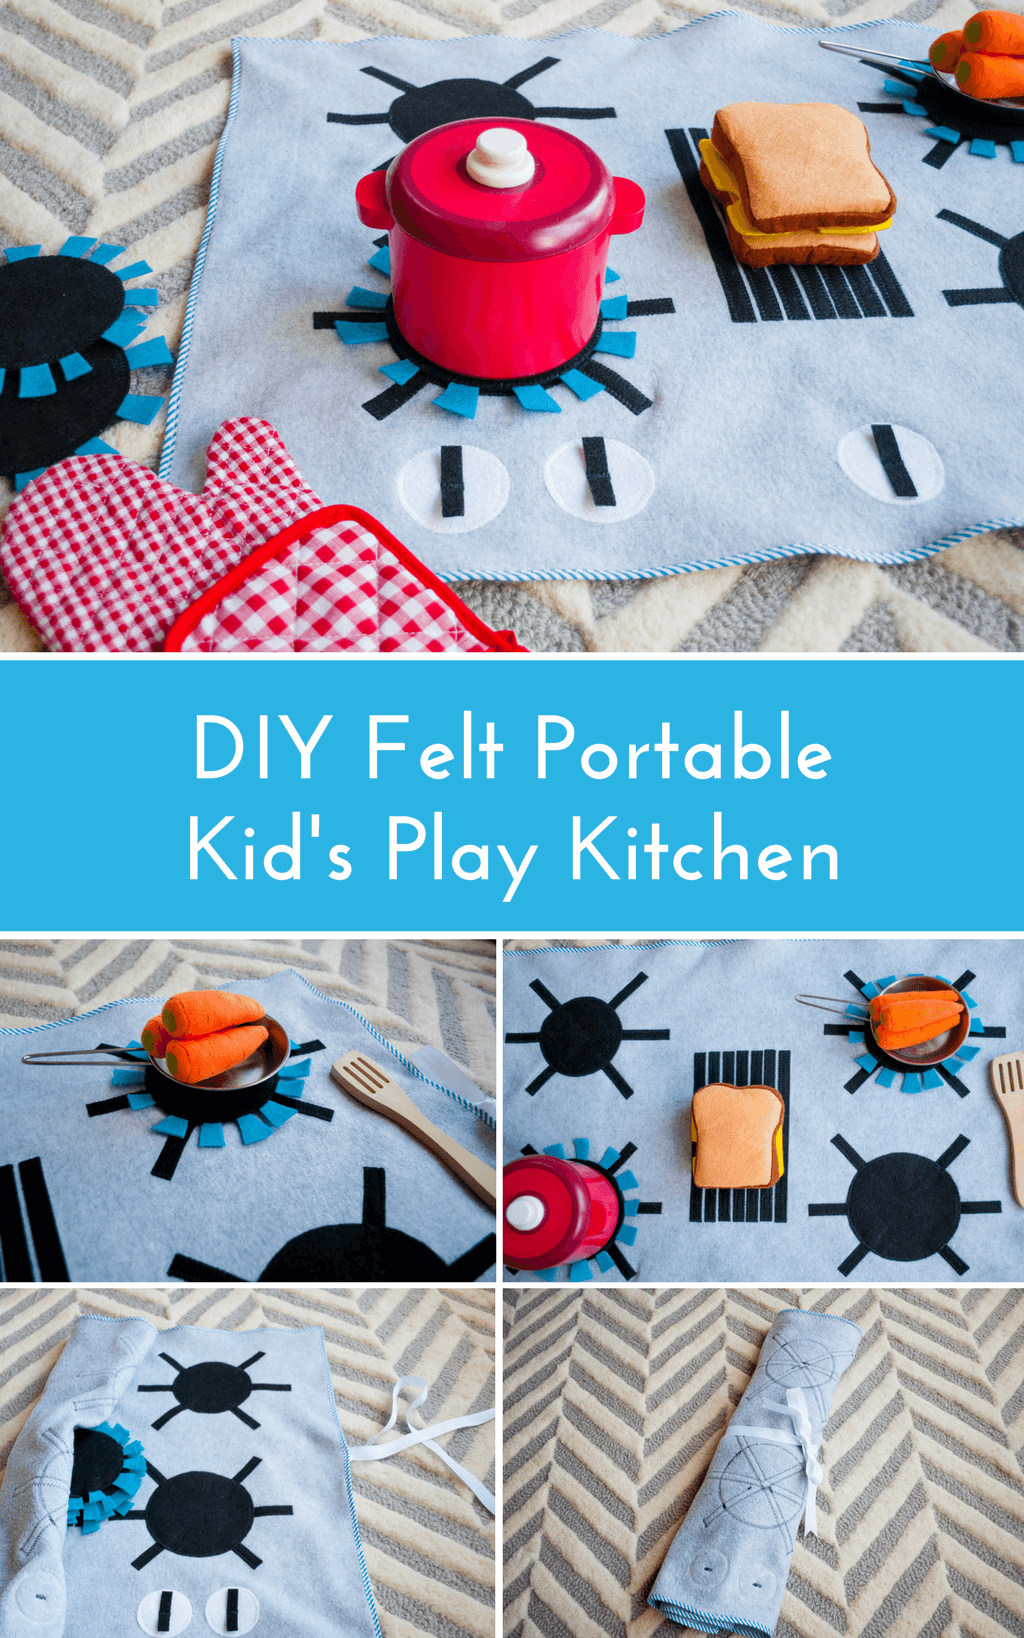 Felt stove DIY kids play kitchen with detachable felt "burners." It's flat, so you can put it anywhere and roll it up to store away. What a great kids DIY Christmas gift idea! | DIY play kitchen | DIY felt stovetop | DIY felt oven #diygifts #christmas #sewing #freesewingpattern #sewingpattern #DIY #diyforkids